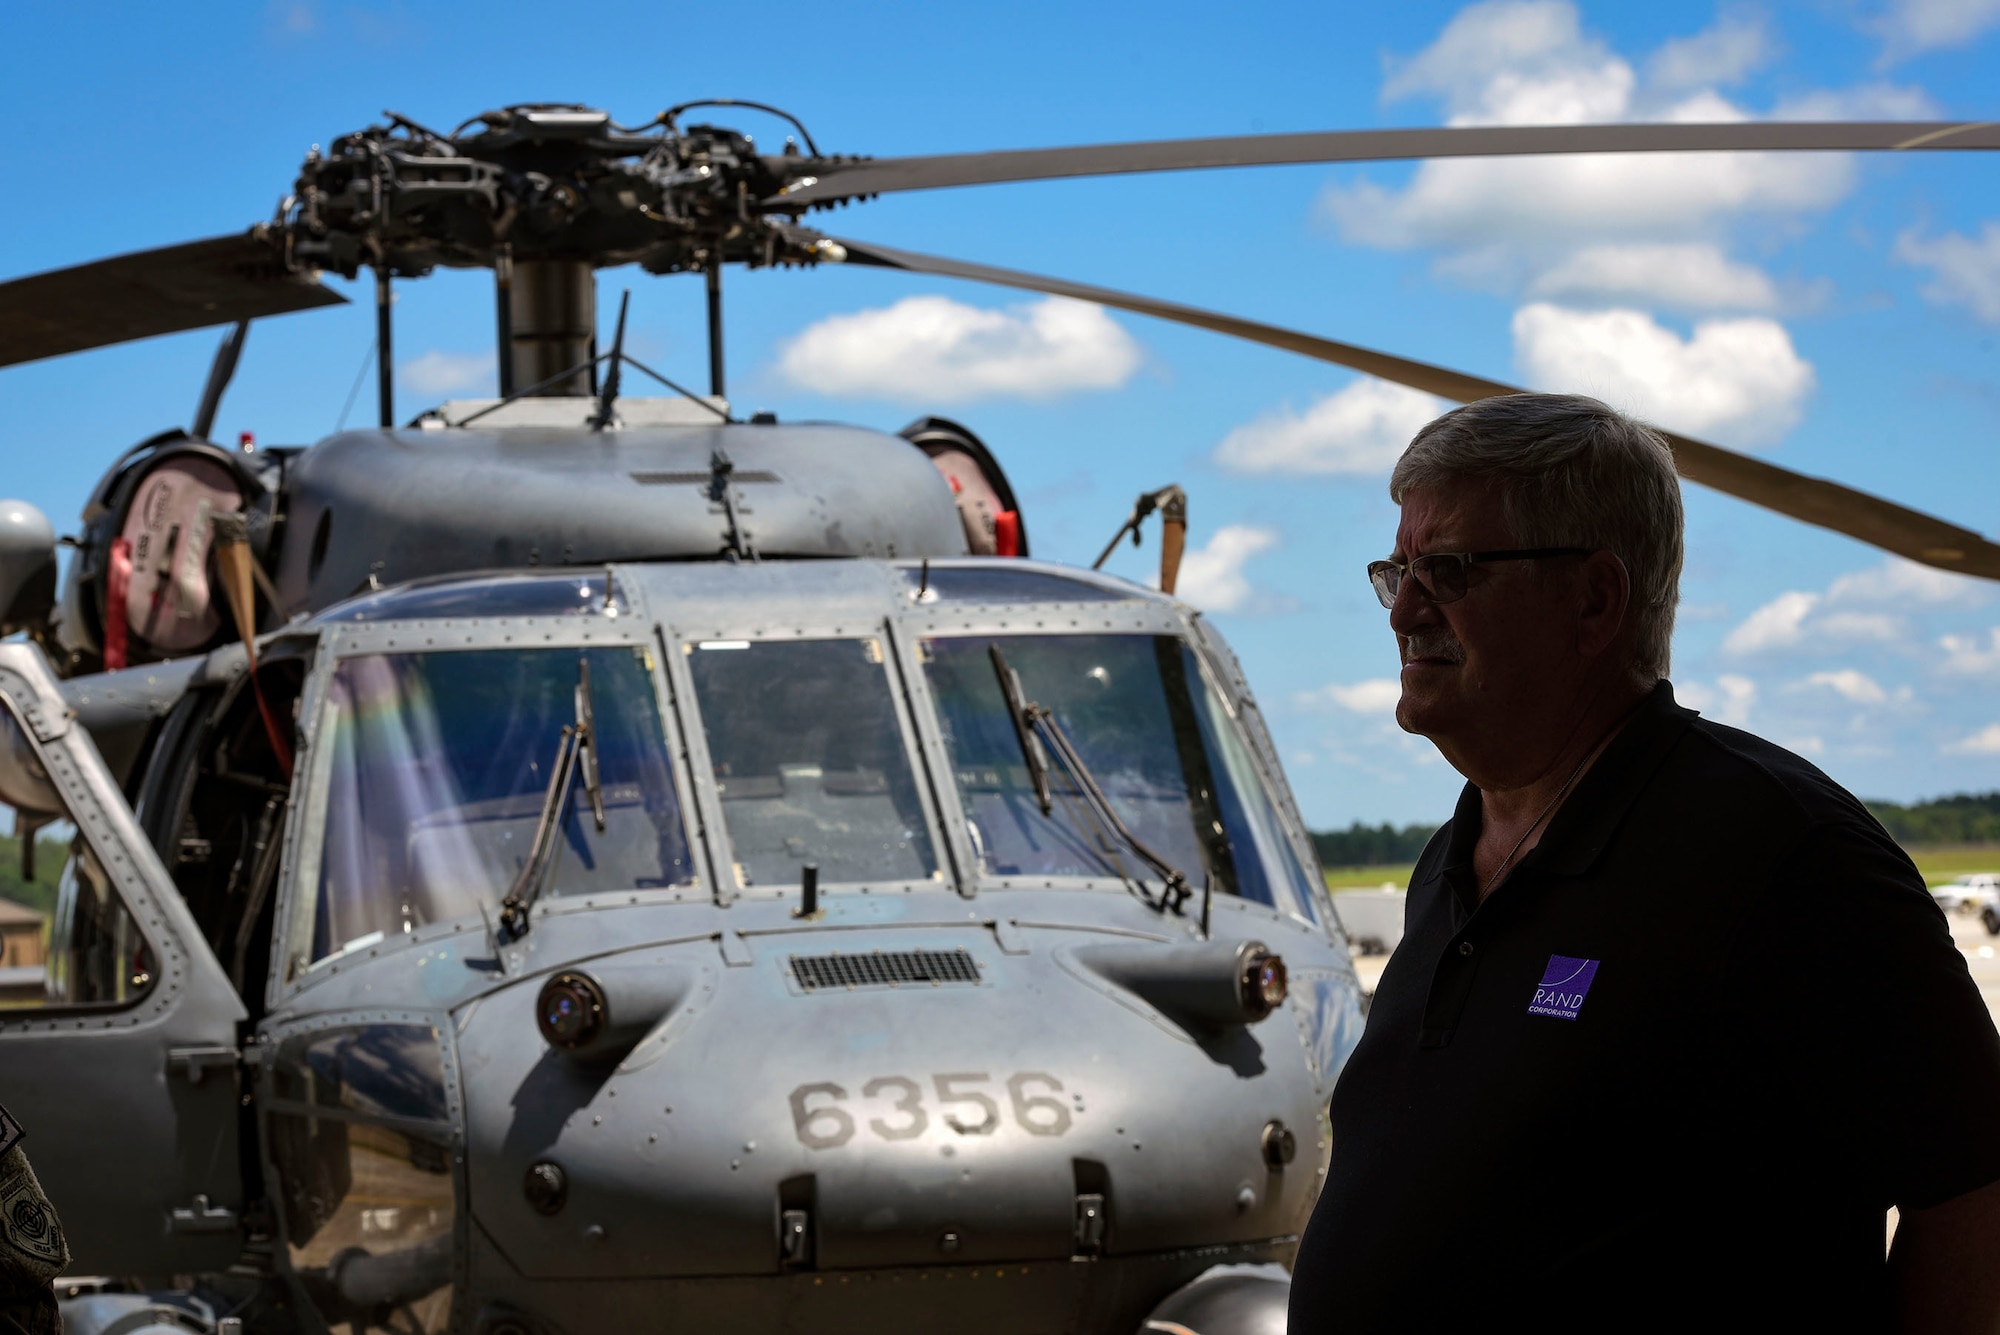 John Drew, RAND Corporation senior defense analyst, stands in front of an HH-60G Pave Hawk during a visit, Aug. 7, 2018, at Moody Air Force Base, Ga. RAND integrated with Moody’s rescue, flying and maintenance professionals to examine firsthand Air Force operations. This familiarization helps RAND develop their analysis to ultimately present policy recommendations to Air Force decision makers. Since 1948, RAND has performed analysis for the U.S. Air Force. (U.S. Air Force photo by Senior Airman Greg Nash)